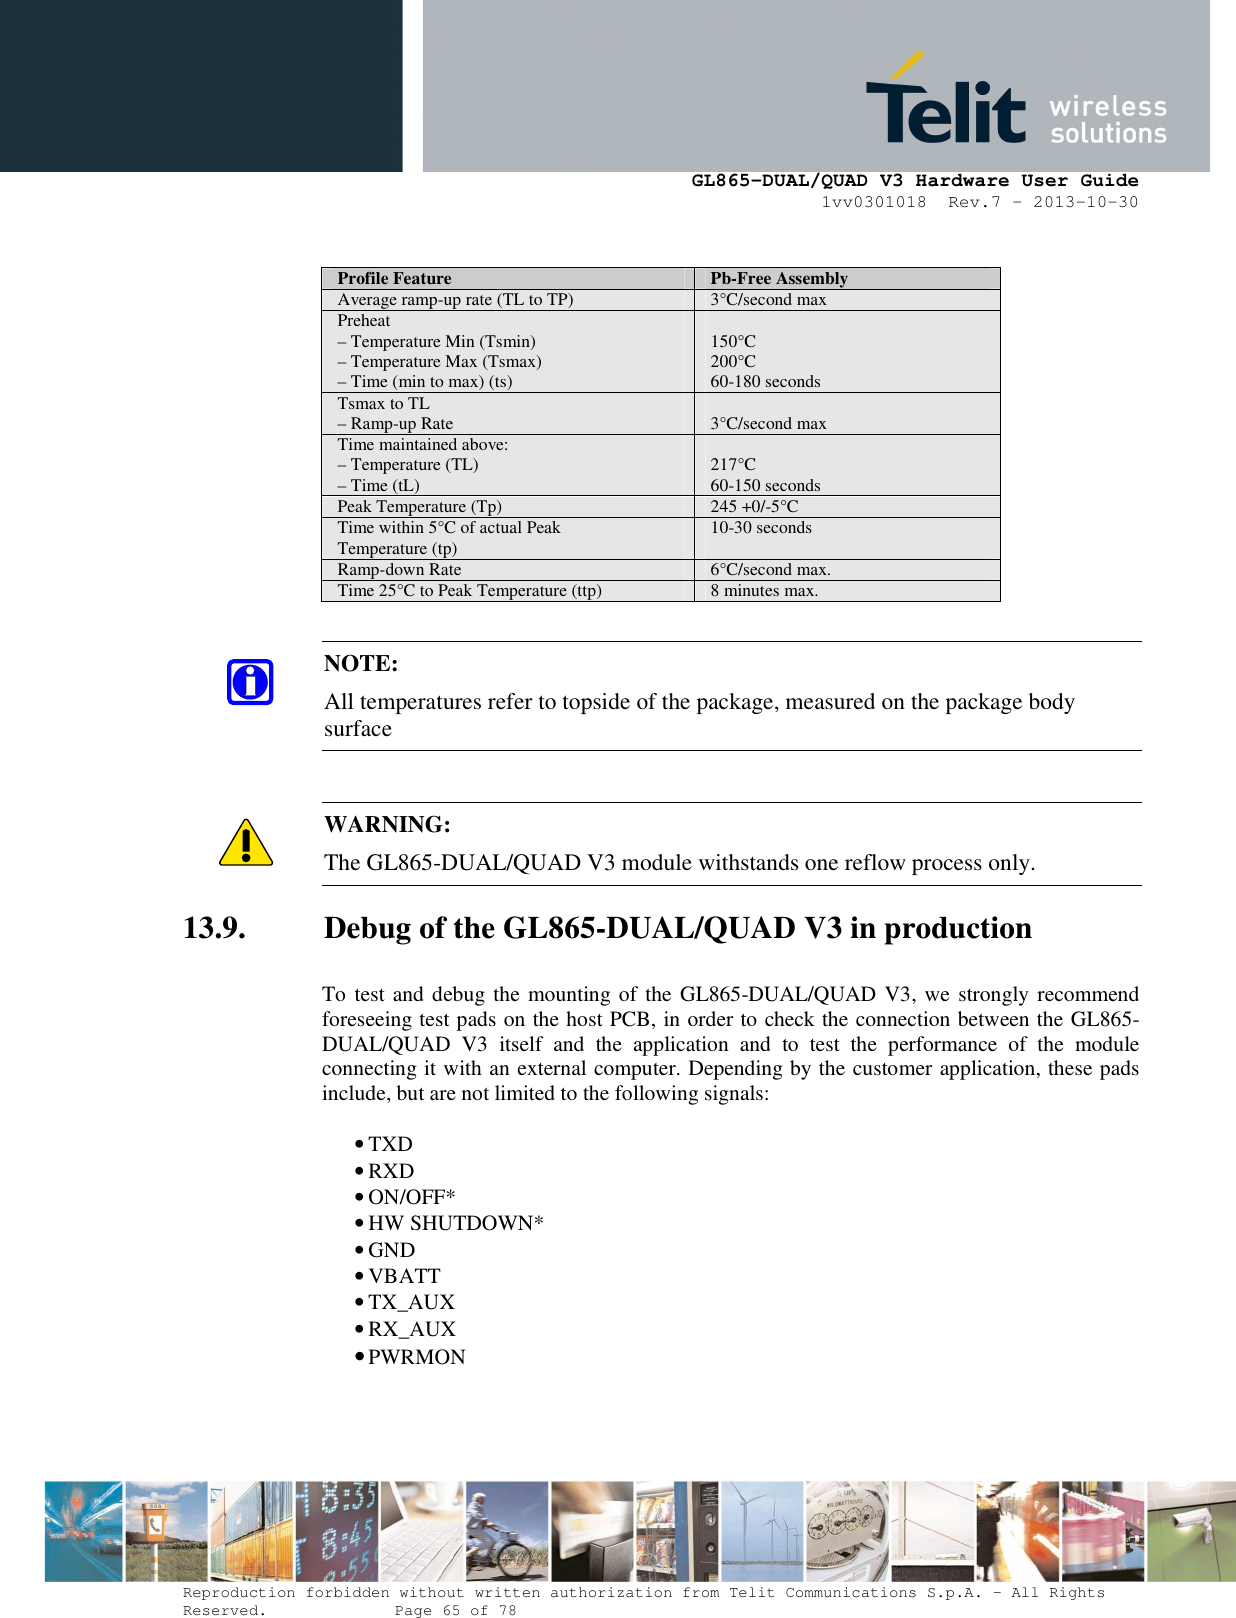      GL865-DUAL/QUAD V3 Hardware User Guide 1vv0301018  Rev.7 – 2013-10-30  Reproduction forbidden without written authorization from Telit Communications S.p.A. - All Rights Reserved.    Page 65 of 78 Mod. 0805 2011-07 Rev.2  Profile Feature  Pb-Free Assembly Average ramp-up rate (TL to TP)  3°C/second max Preheat – Temperature Min (Tsmin) – Temperature Max (Tsmax) – Time (min to max) (ts)  150°C 200°C 60-180 seconds Tsmax to TL – Ramp-up Rate   3°C/second max Time maintained above: – Temperature (TL) – Time (tL)  217°C 60-150 seconds Peak Temperature (Tp)  245 +0/-5°C Time within 5°C of actual Peak Temperature (tp)  10-30 seconds  Ramp-down Rate  6°C/second max. Time 25°C to Peak Temperature (ttp)  8 minutes max.  NOTE: All temperatures refer to topside of the package, measured on the package body surface   WARNING: The GL865-DUAL/QUAD V3 module withstands one reflow process only. 13.9. Debug of the GL865-DUAL/QUAD V3 in production  To test and debug the mounting of the GL865-DUAL/QUAD  V3, we strongly recommend foreseeing test pads on the host PCB, in order to check the connection between the GL865-DUAL/QUAD  V3  itself  and  the  application  and  to  test  the  performance  of  the  module connecting it with an external computer. Depending by the customer application, these pads include, but are not limited to the following signals:  • TXD • RXD • ON/OFF* • HW SHUTDOWN* • GND • VBATT • TX_AUX • RX_AUX • PWRMON  